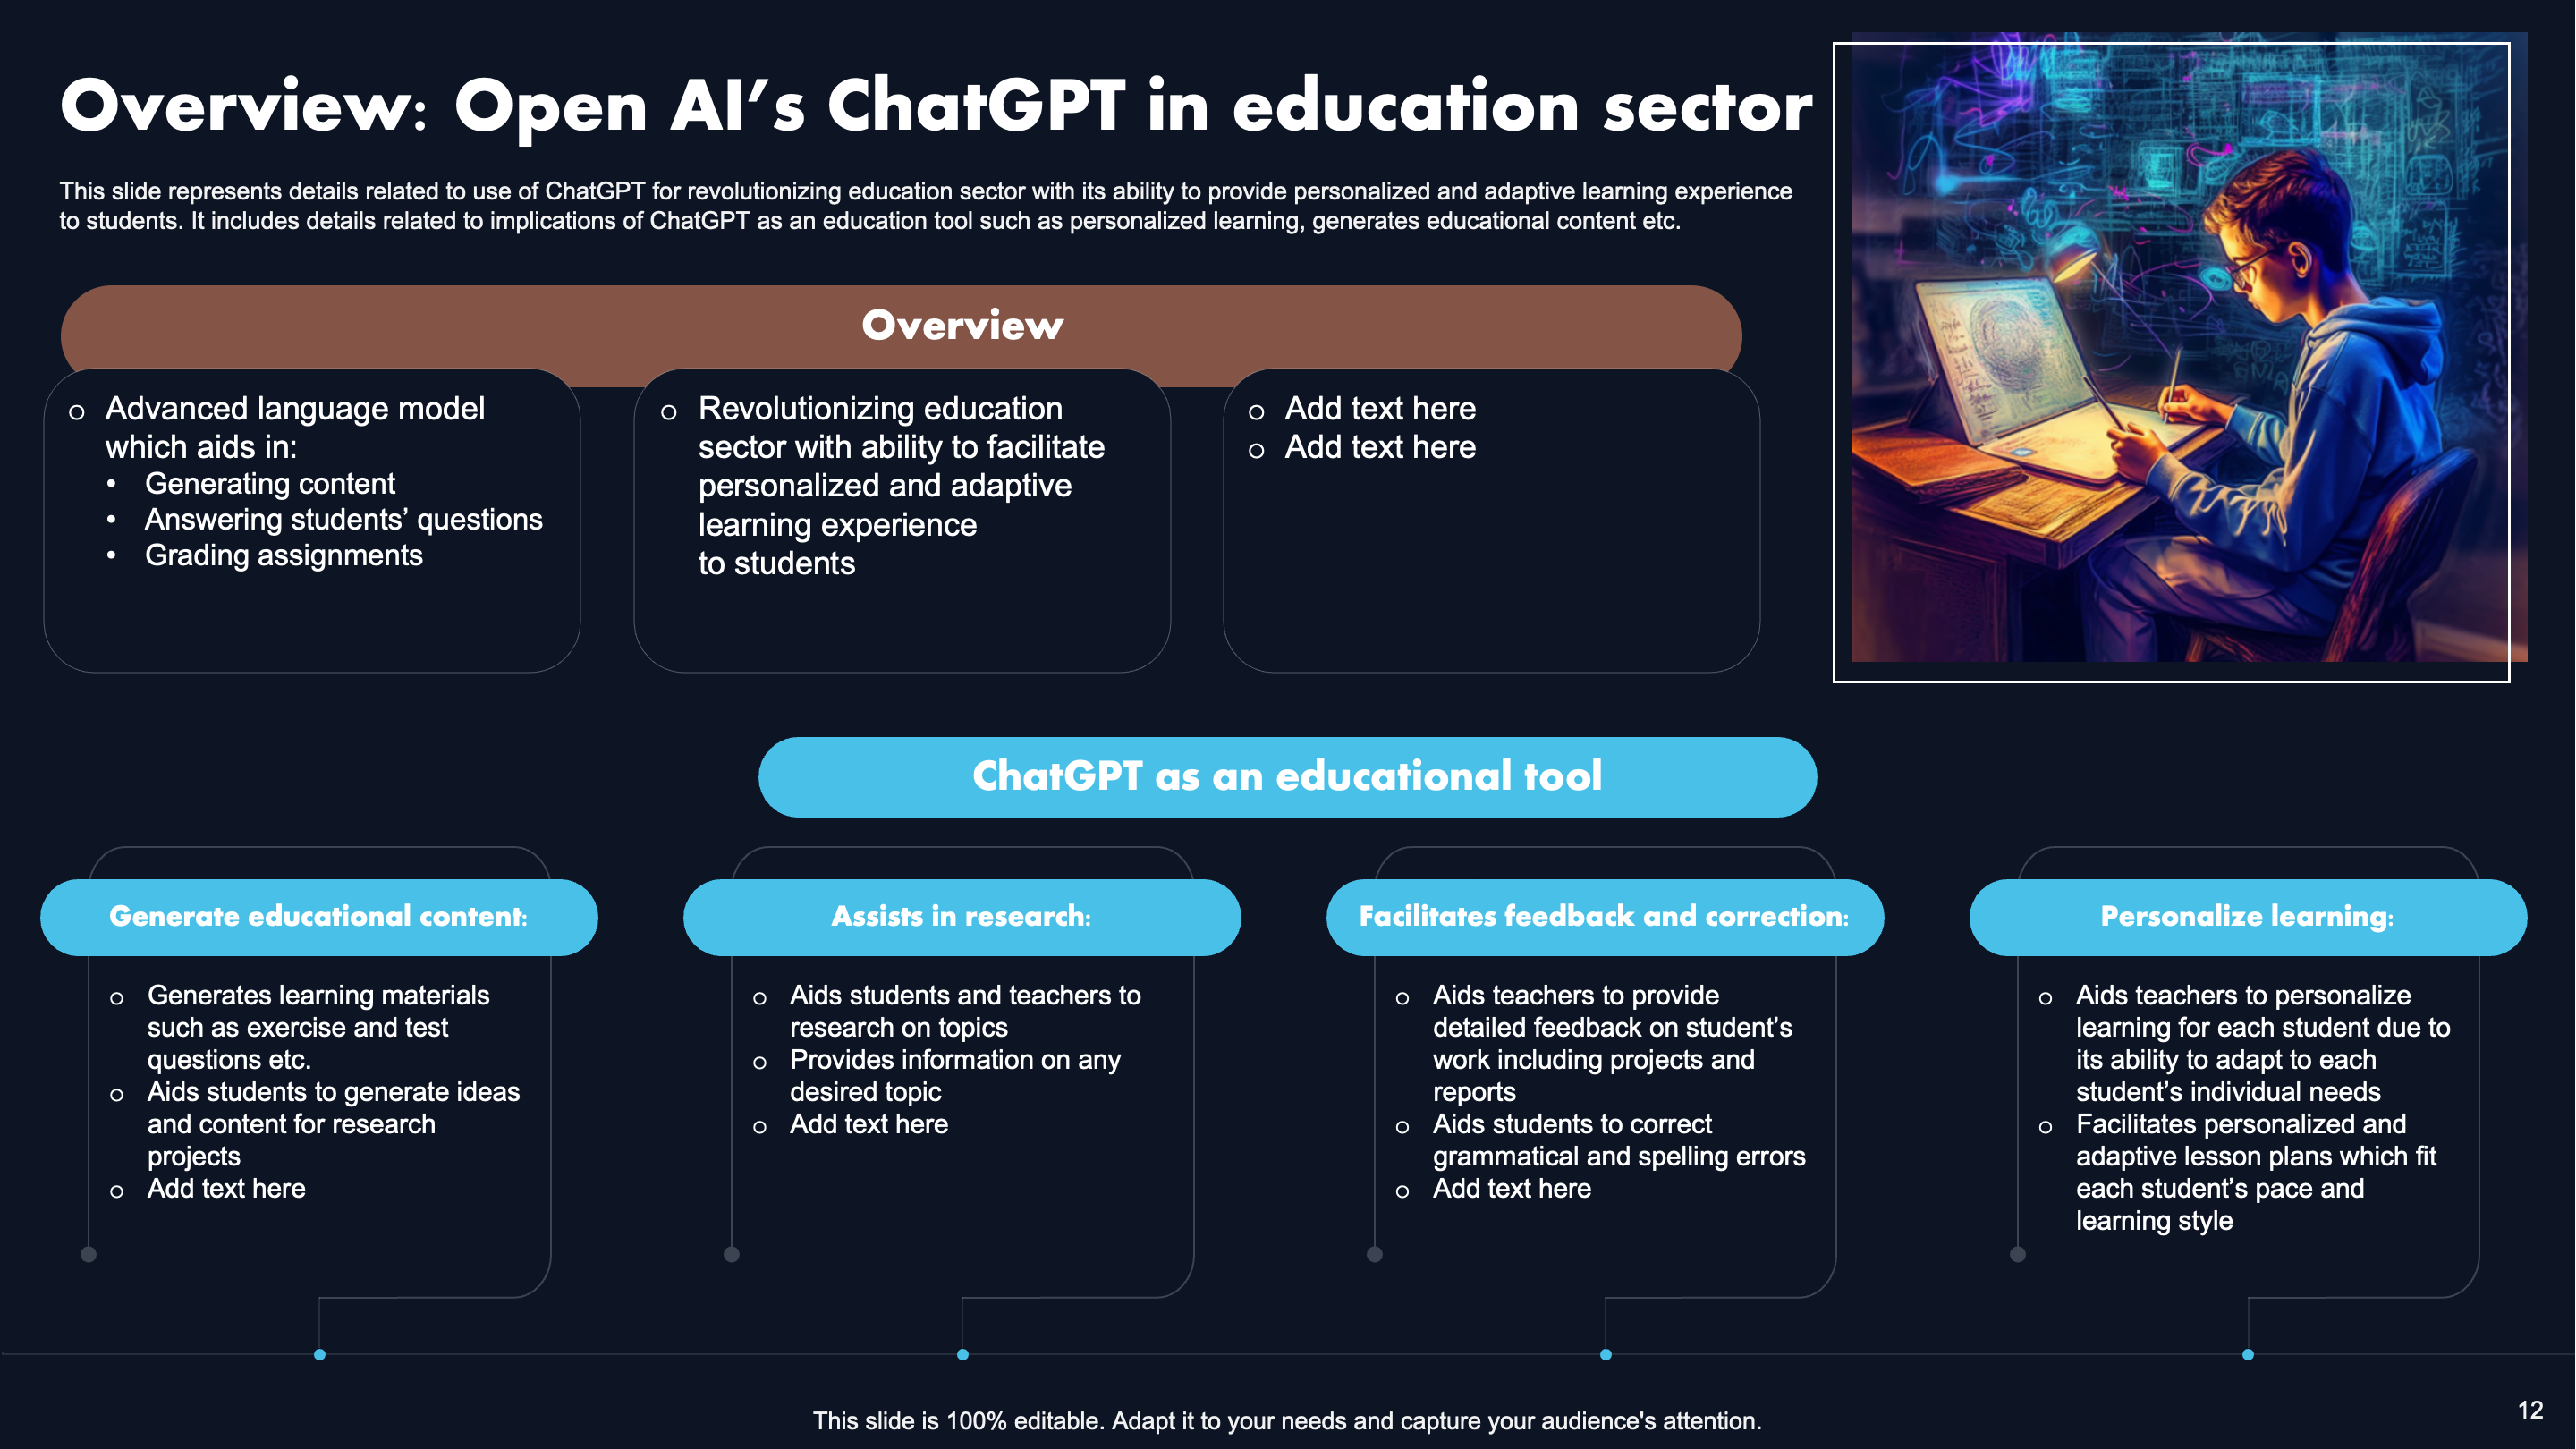 Overview: Open AI’s ChatGPT in Education Sector